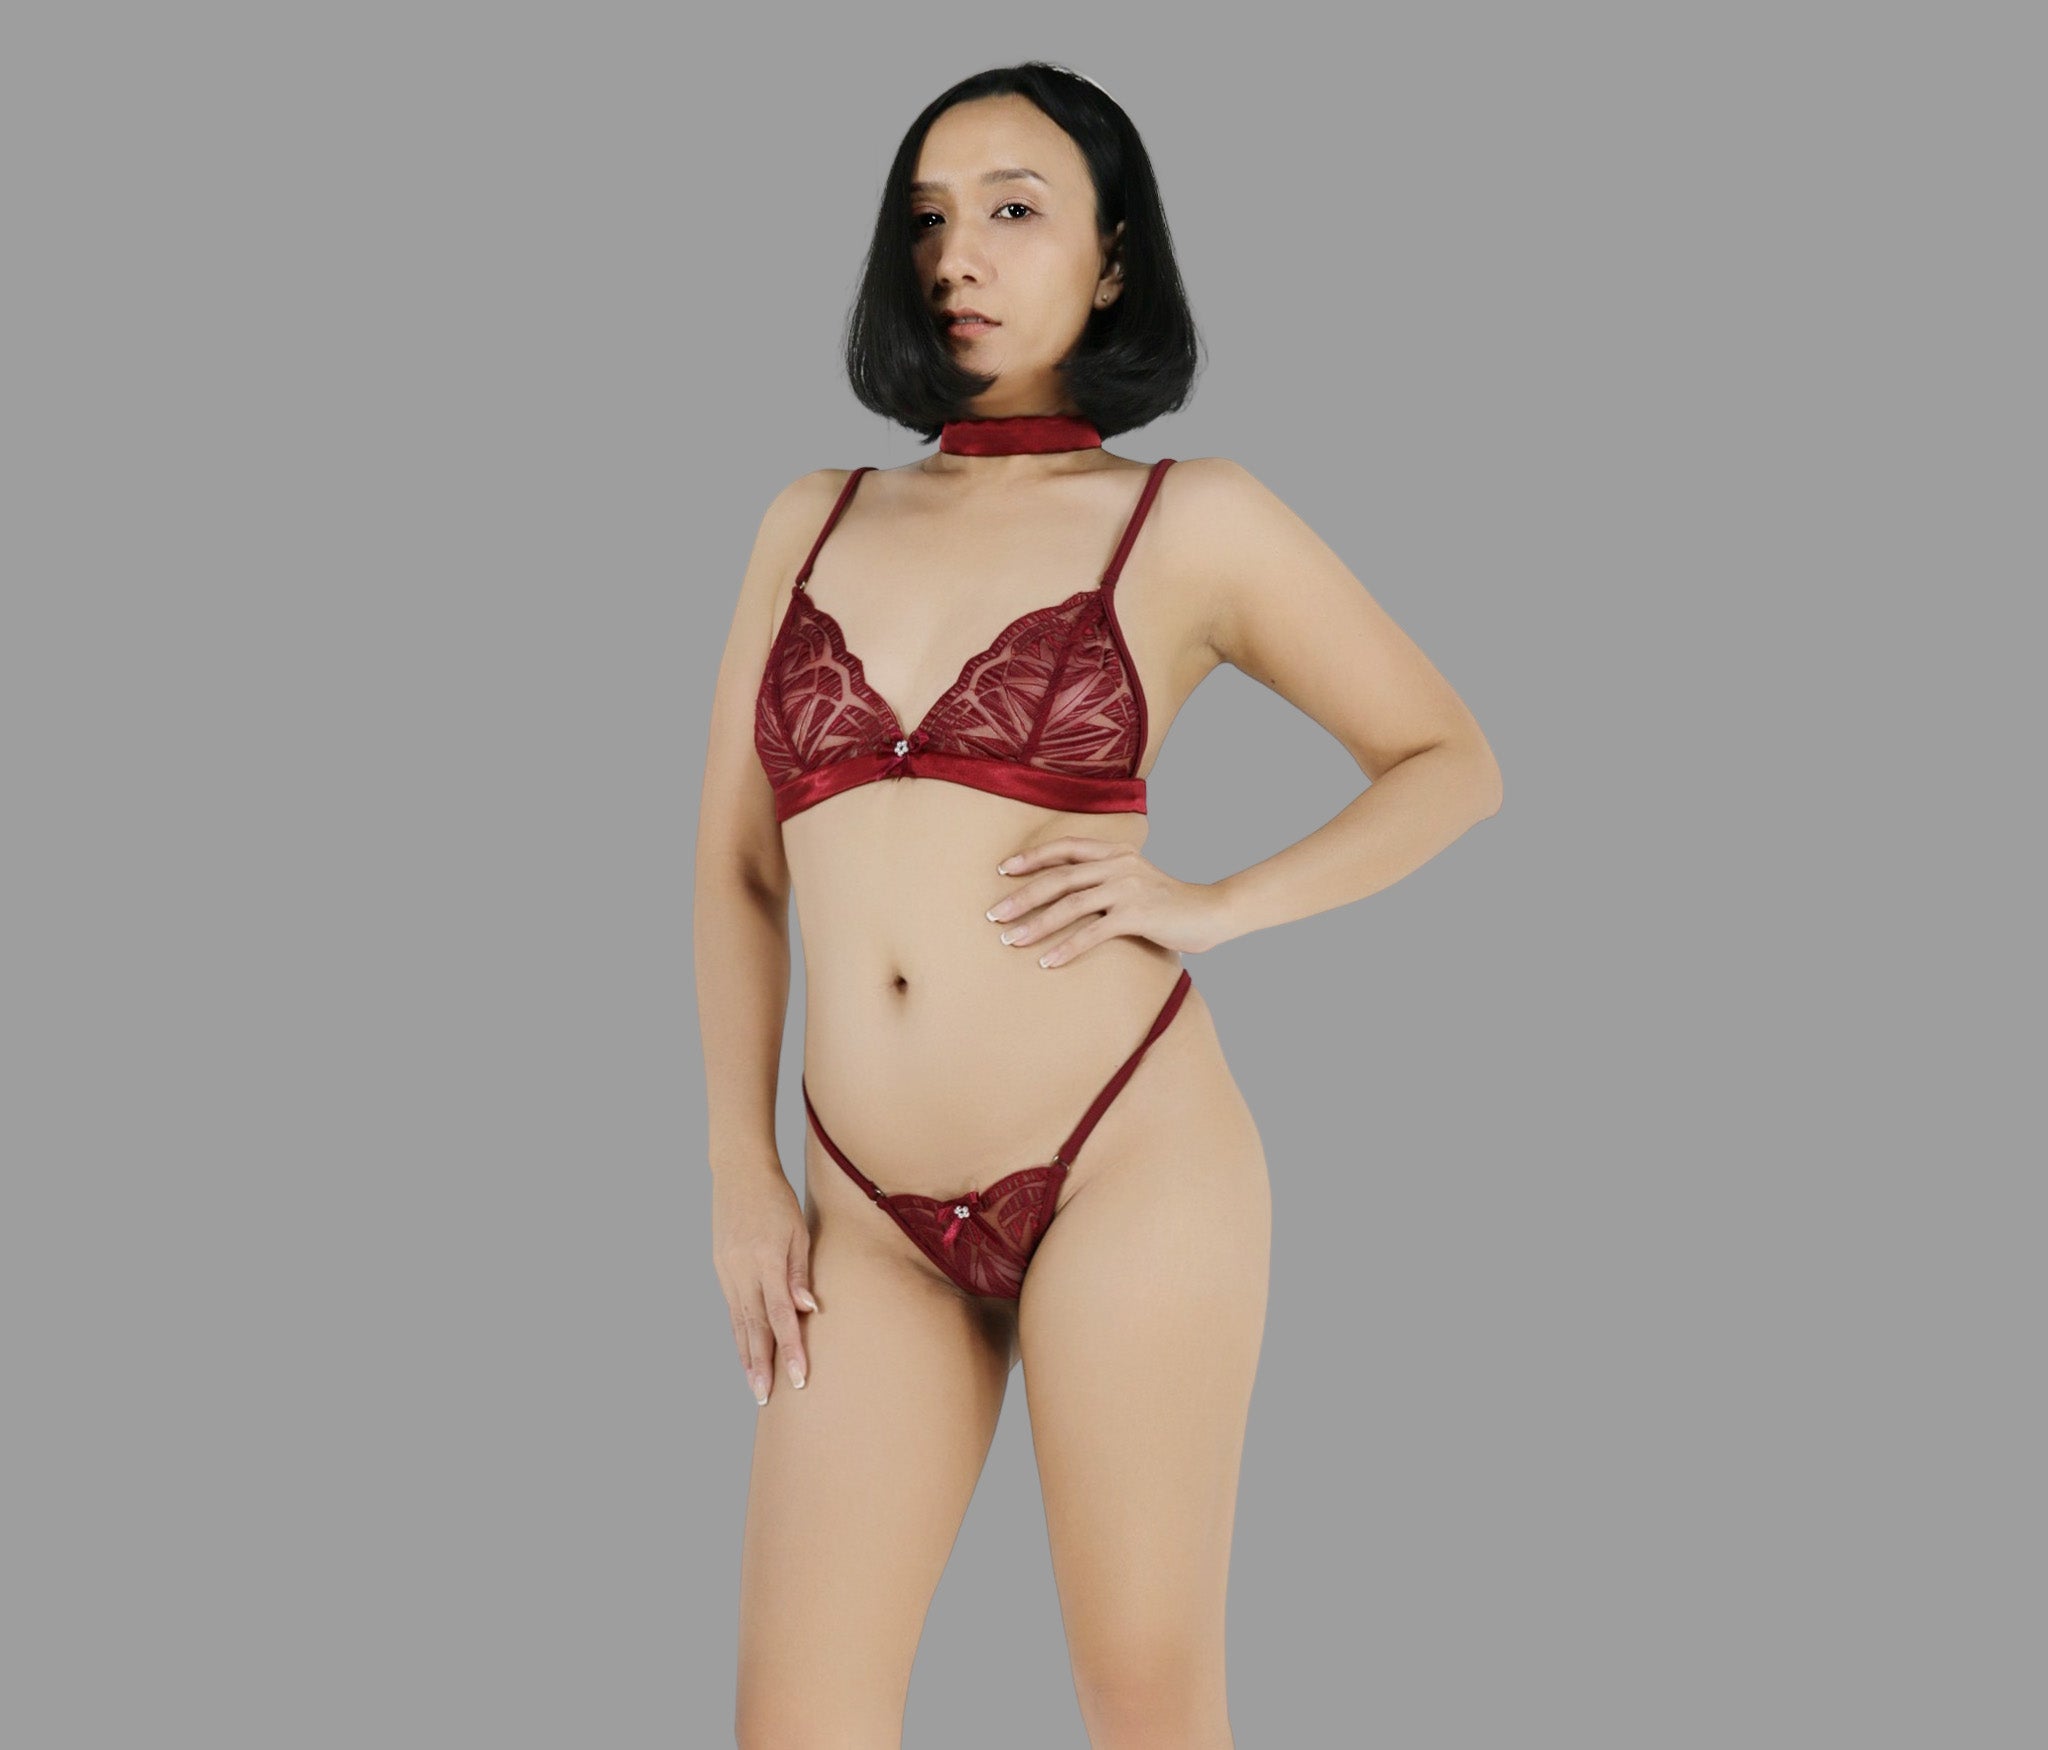 See through lingerie set with G string panties in red lace sexy sheer boudoir lingerie - Ange Déchu